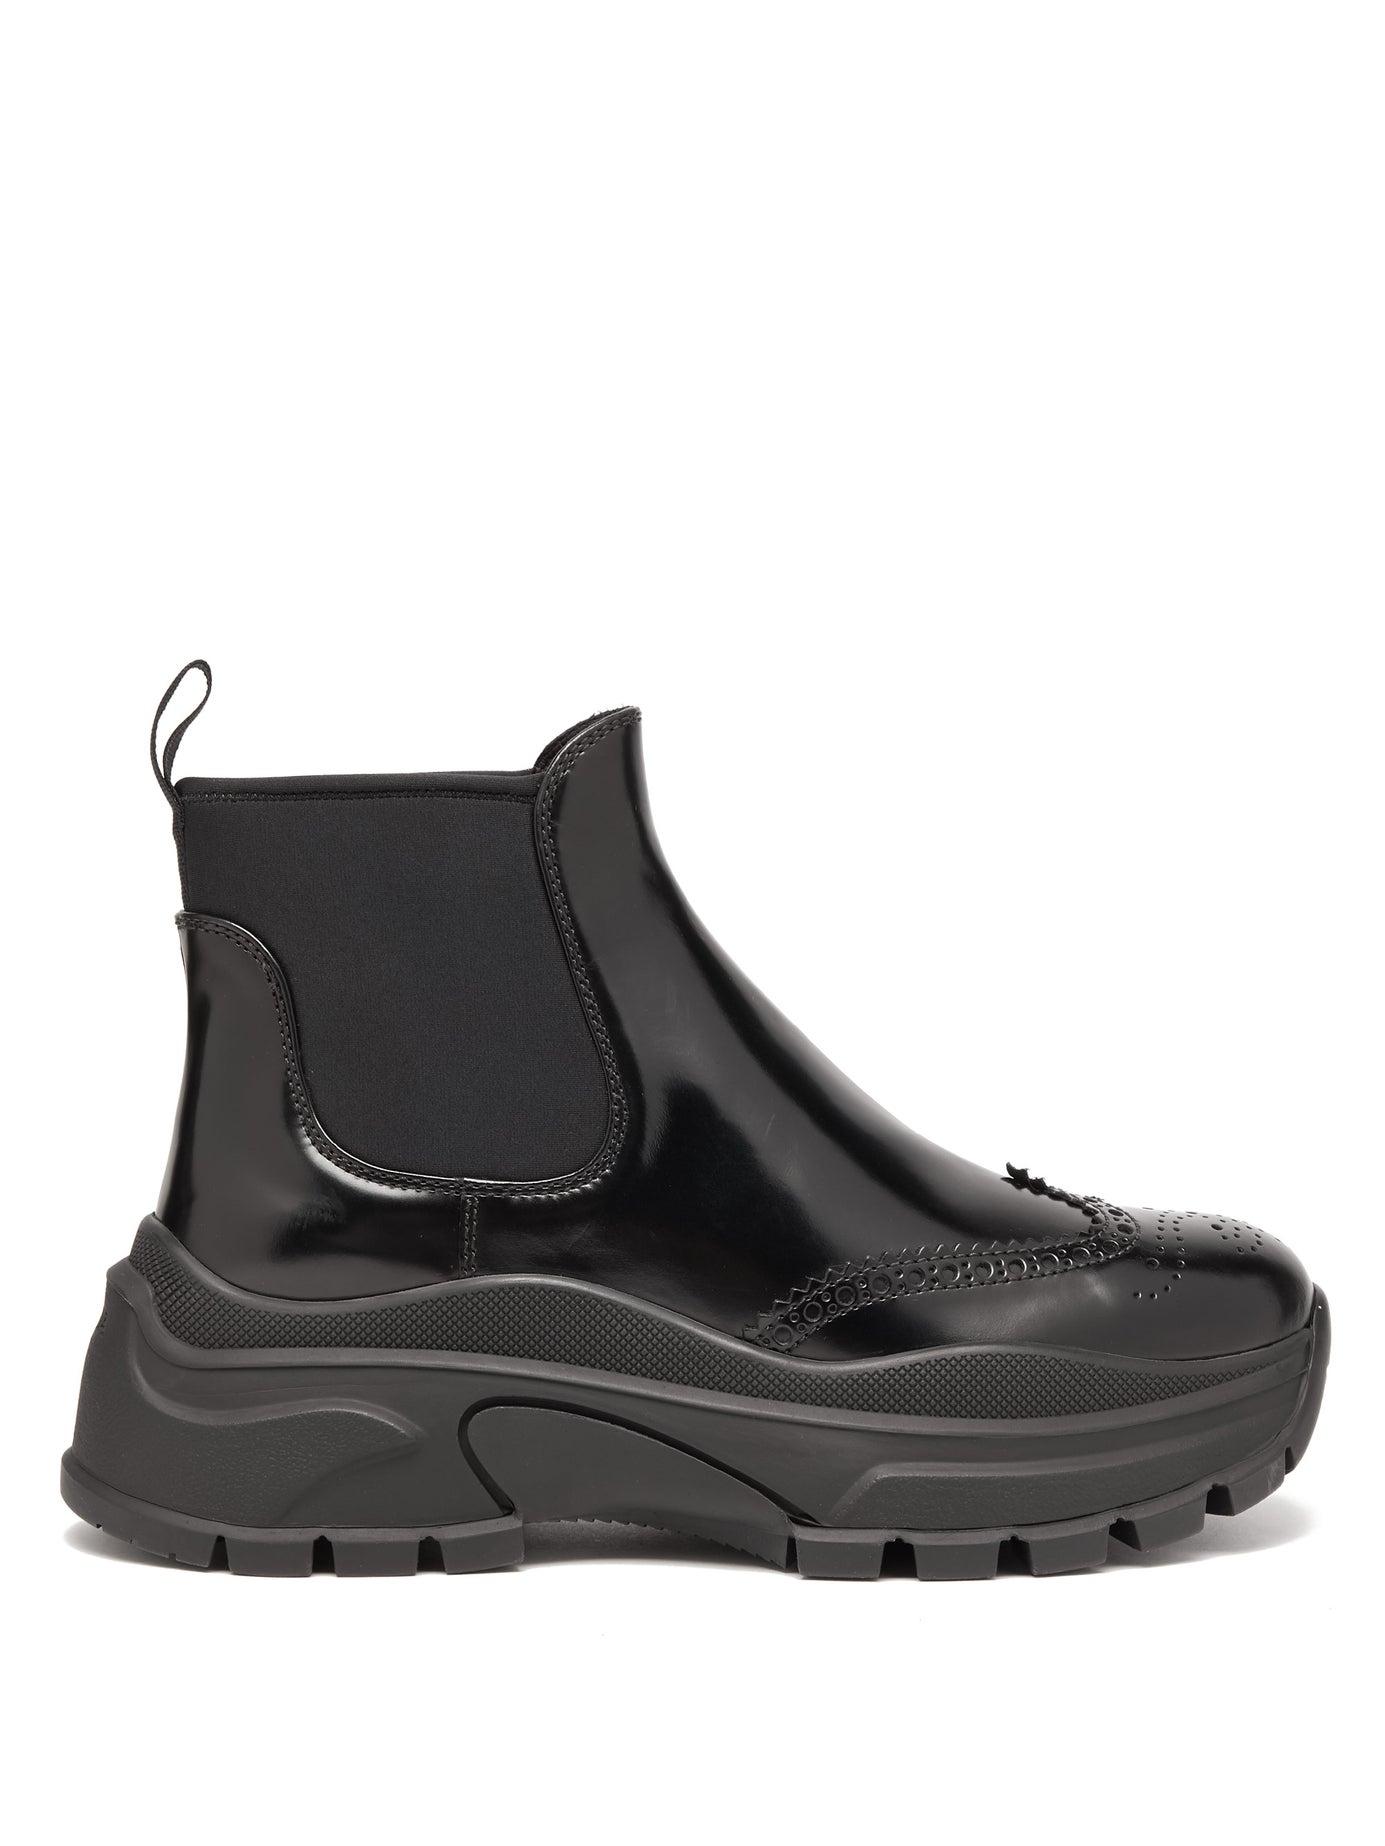 Prada Chunky Sole Patent Leather Ankle Boots in Black - Lyst